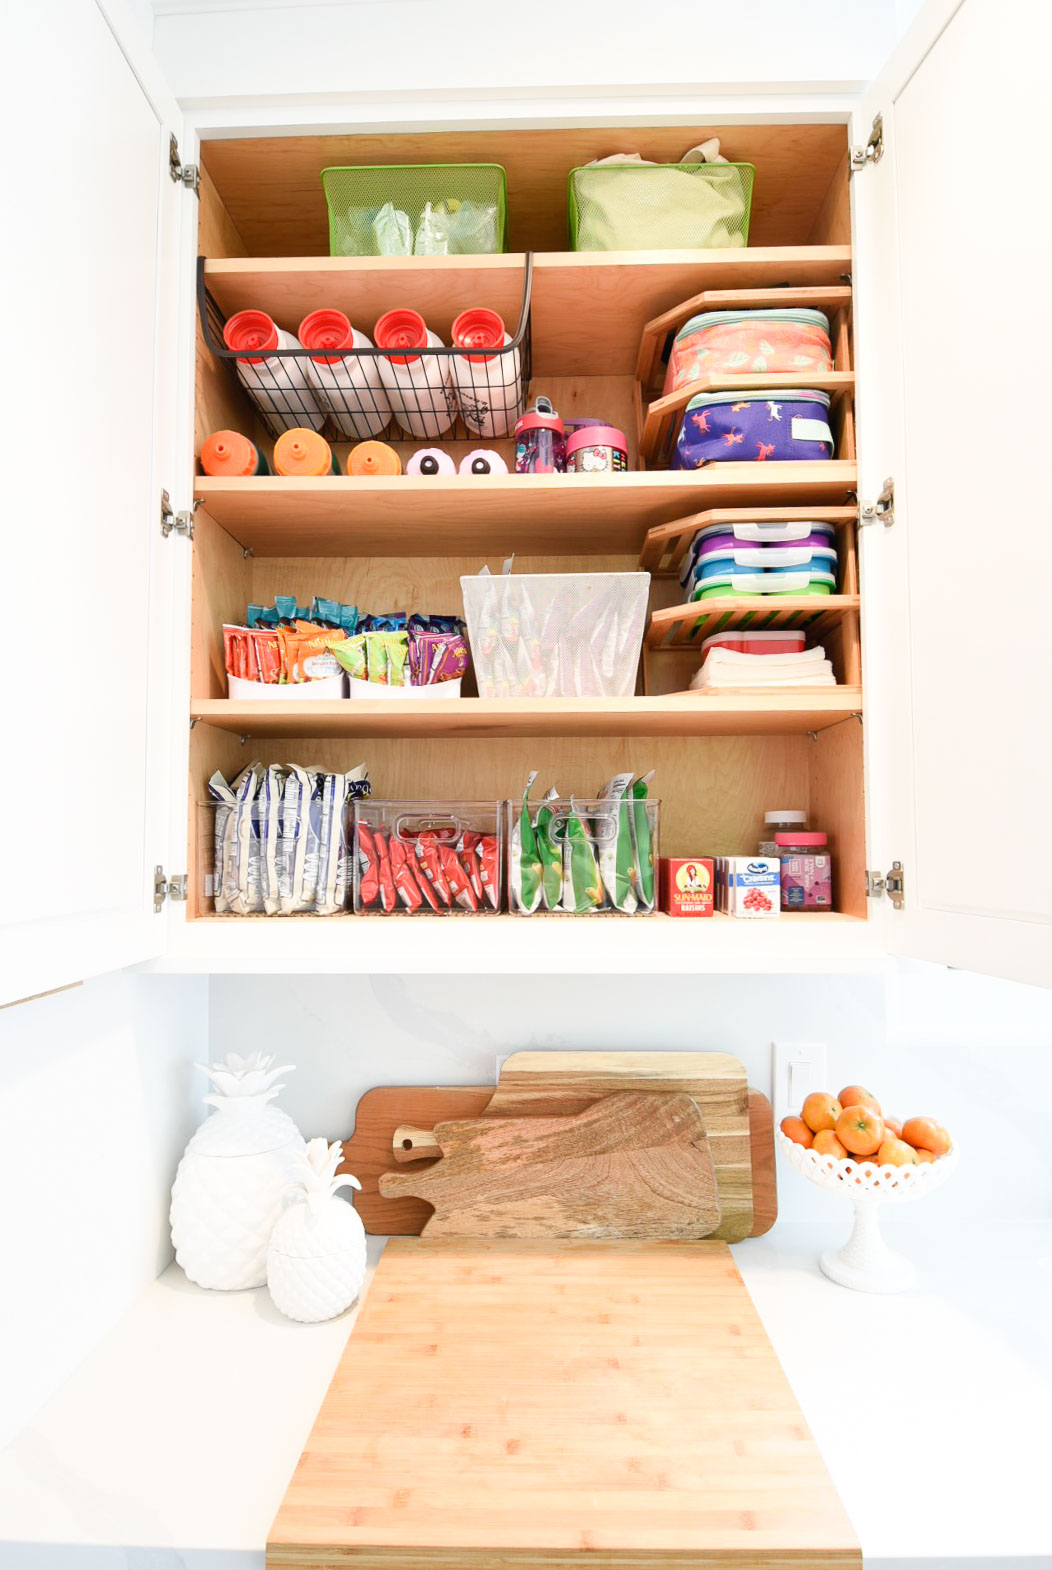 Best Products For Pantry Organization - Home with Keki